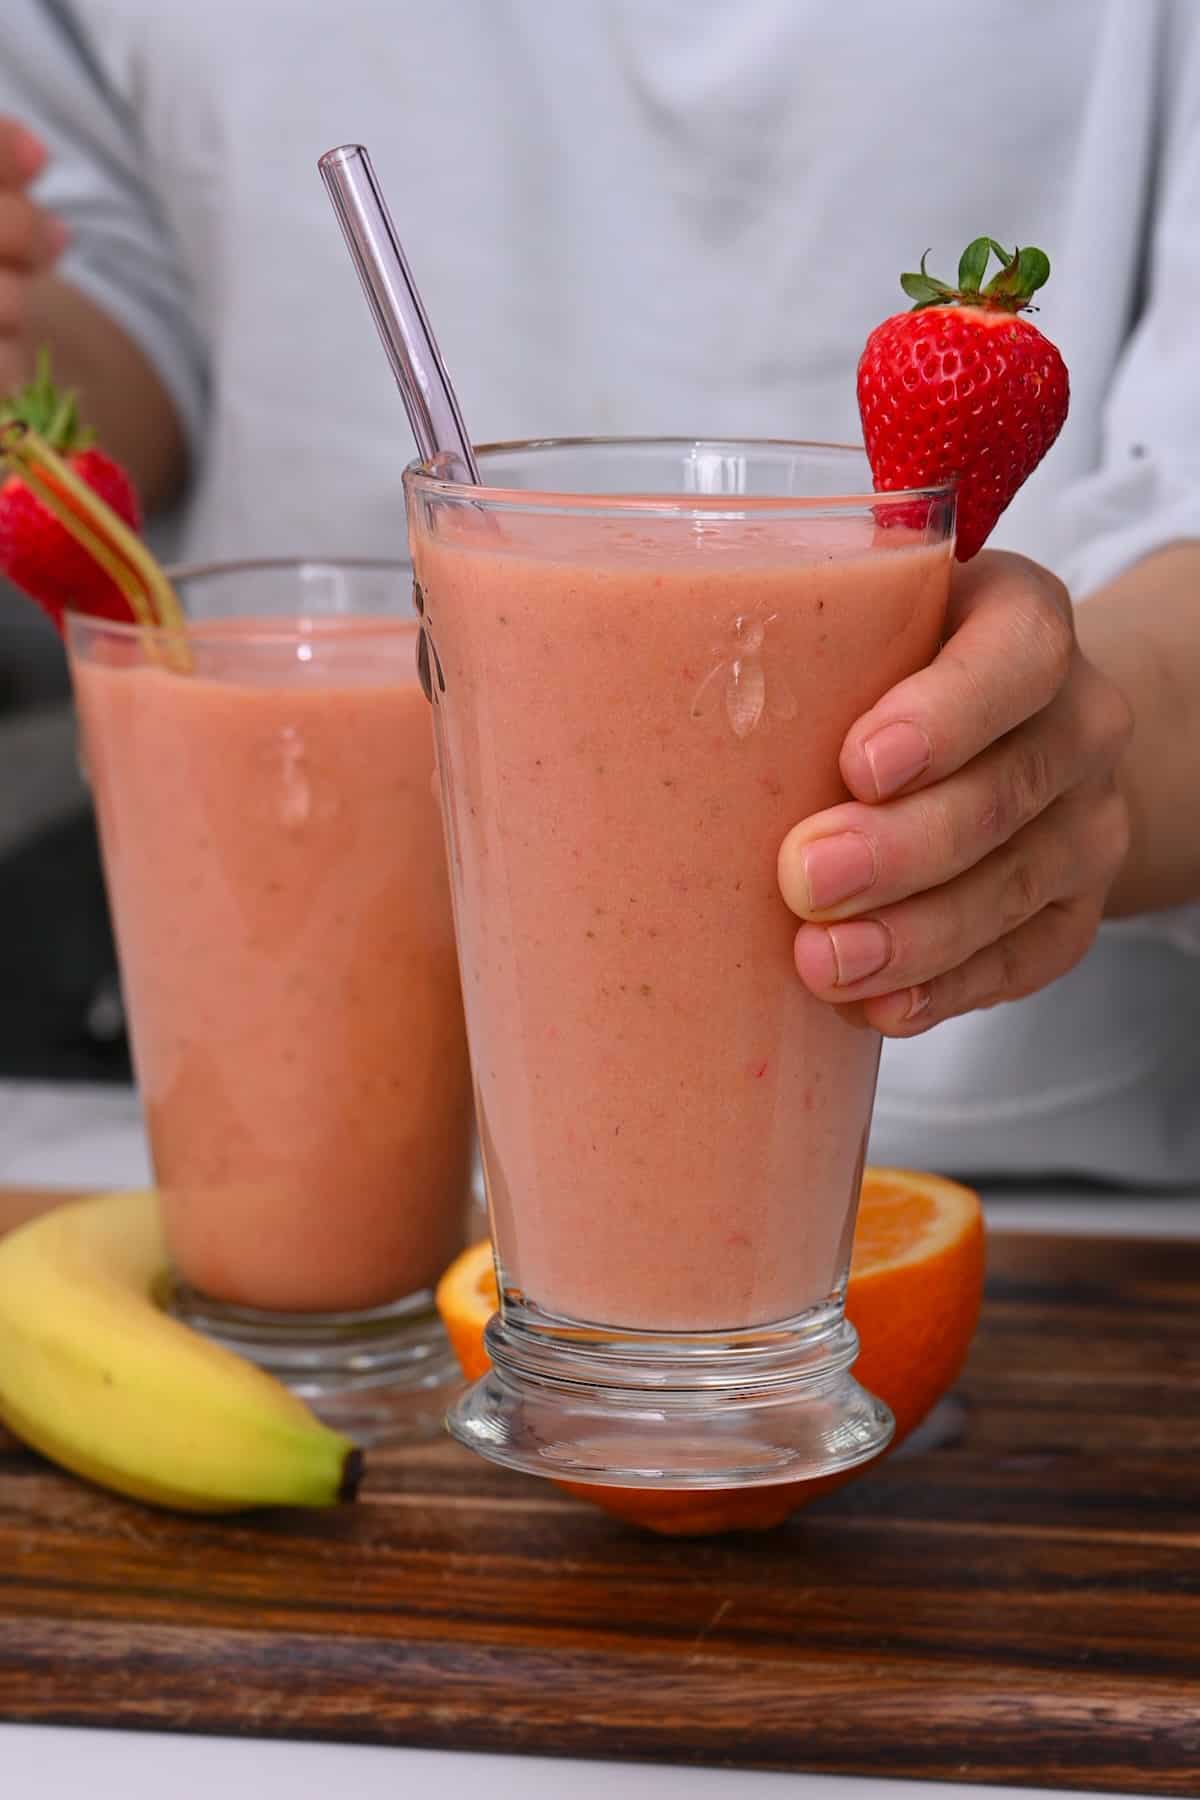 Hand holding a glass with strawberry smoothie topped with a strawberry